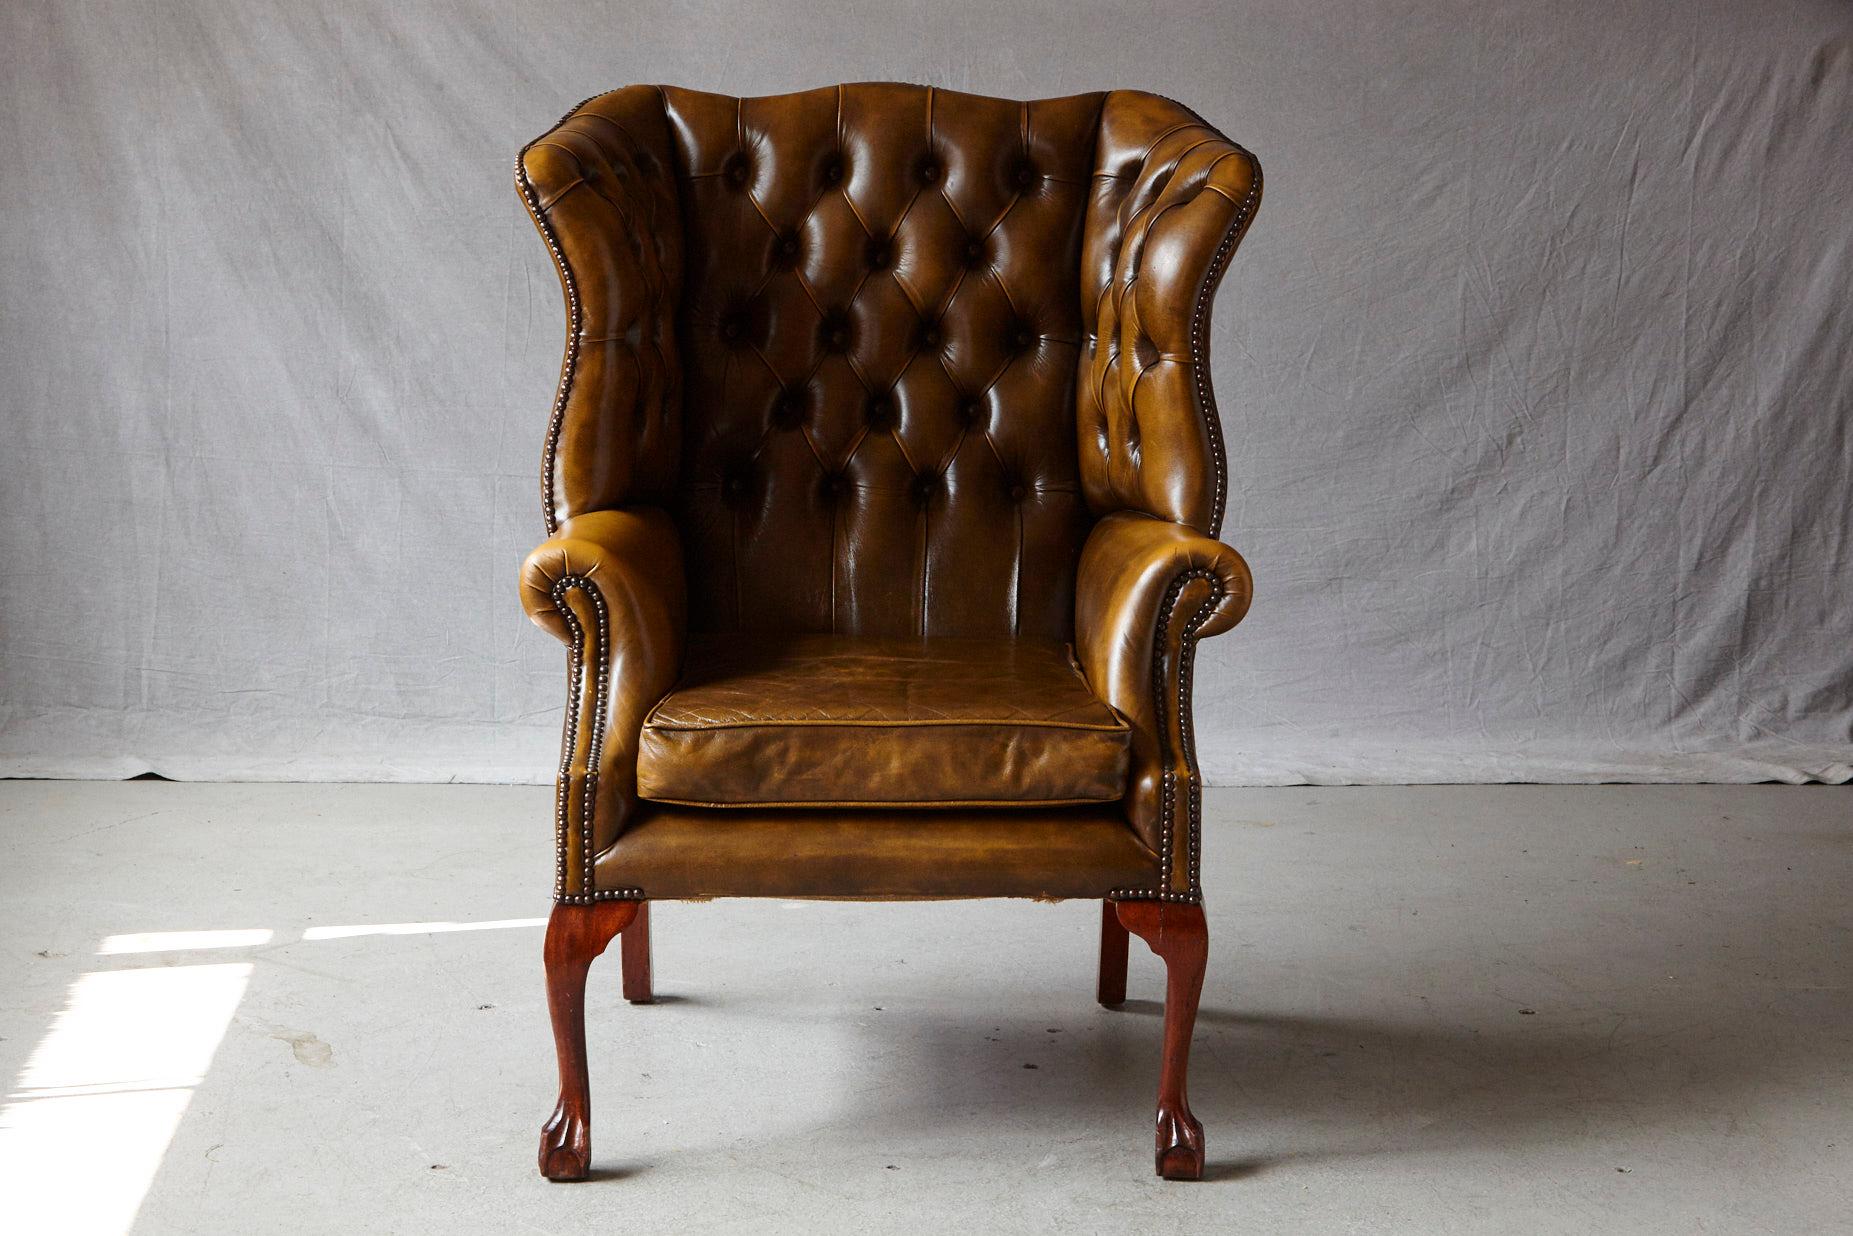 Very comfortable wingback chair upholstered in Buckingham Walnut burnished leather with nailhead trim and clawfeet legs in the front, by Hancock & Moore.
Seat height 20.5 inches, seat depth 22.5 inches.

Buckingham is an old world form of